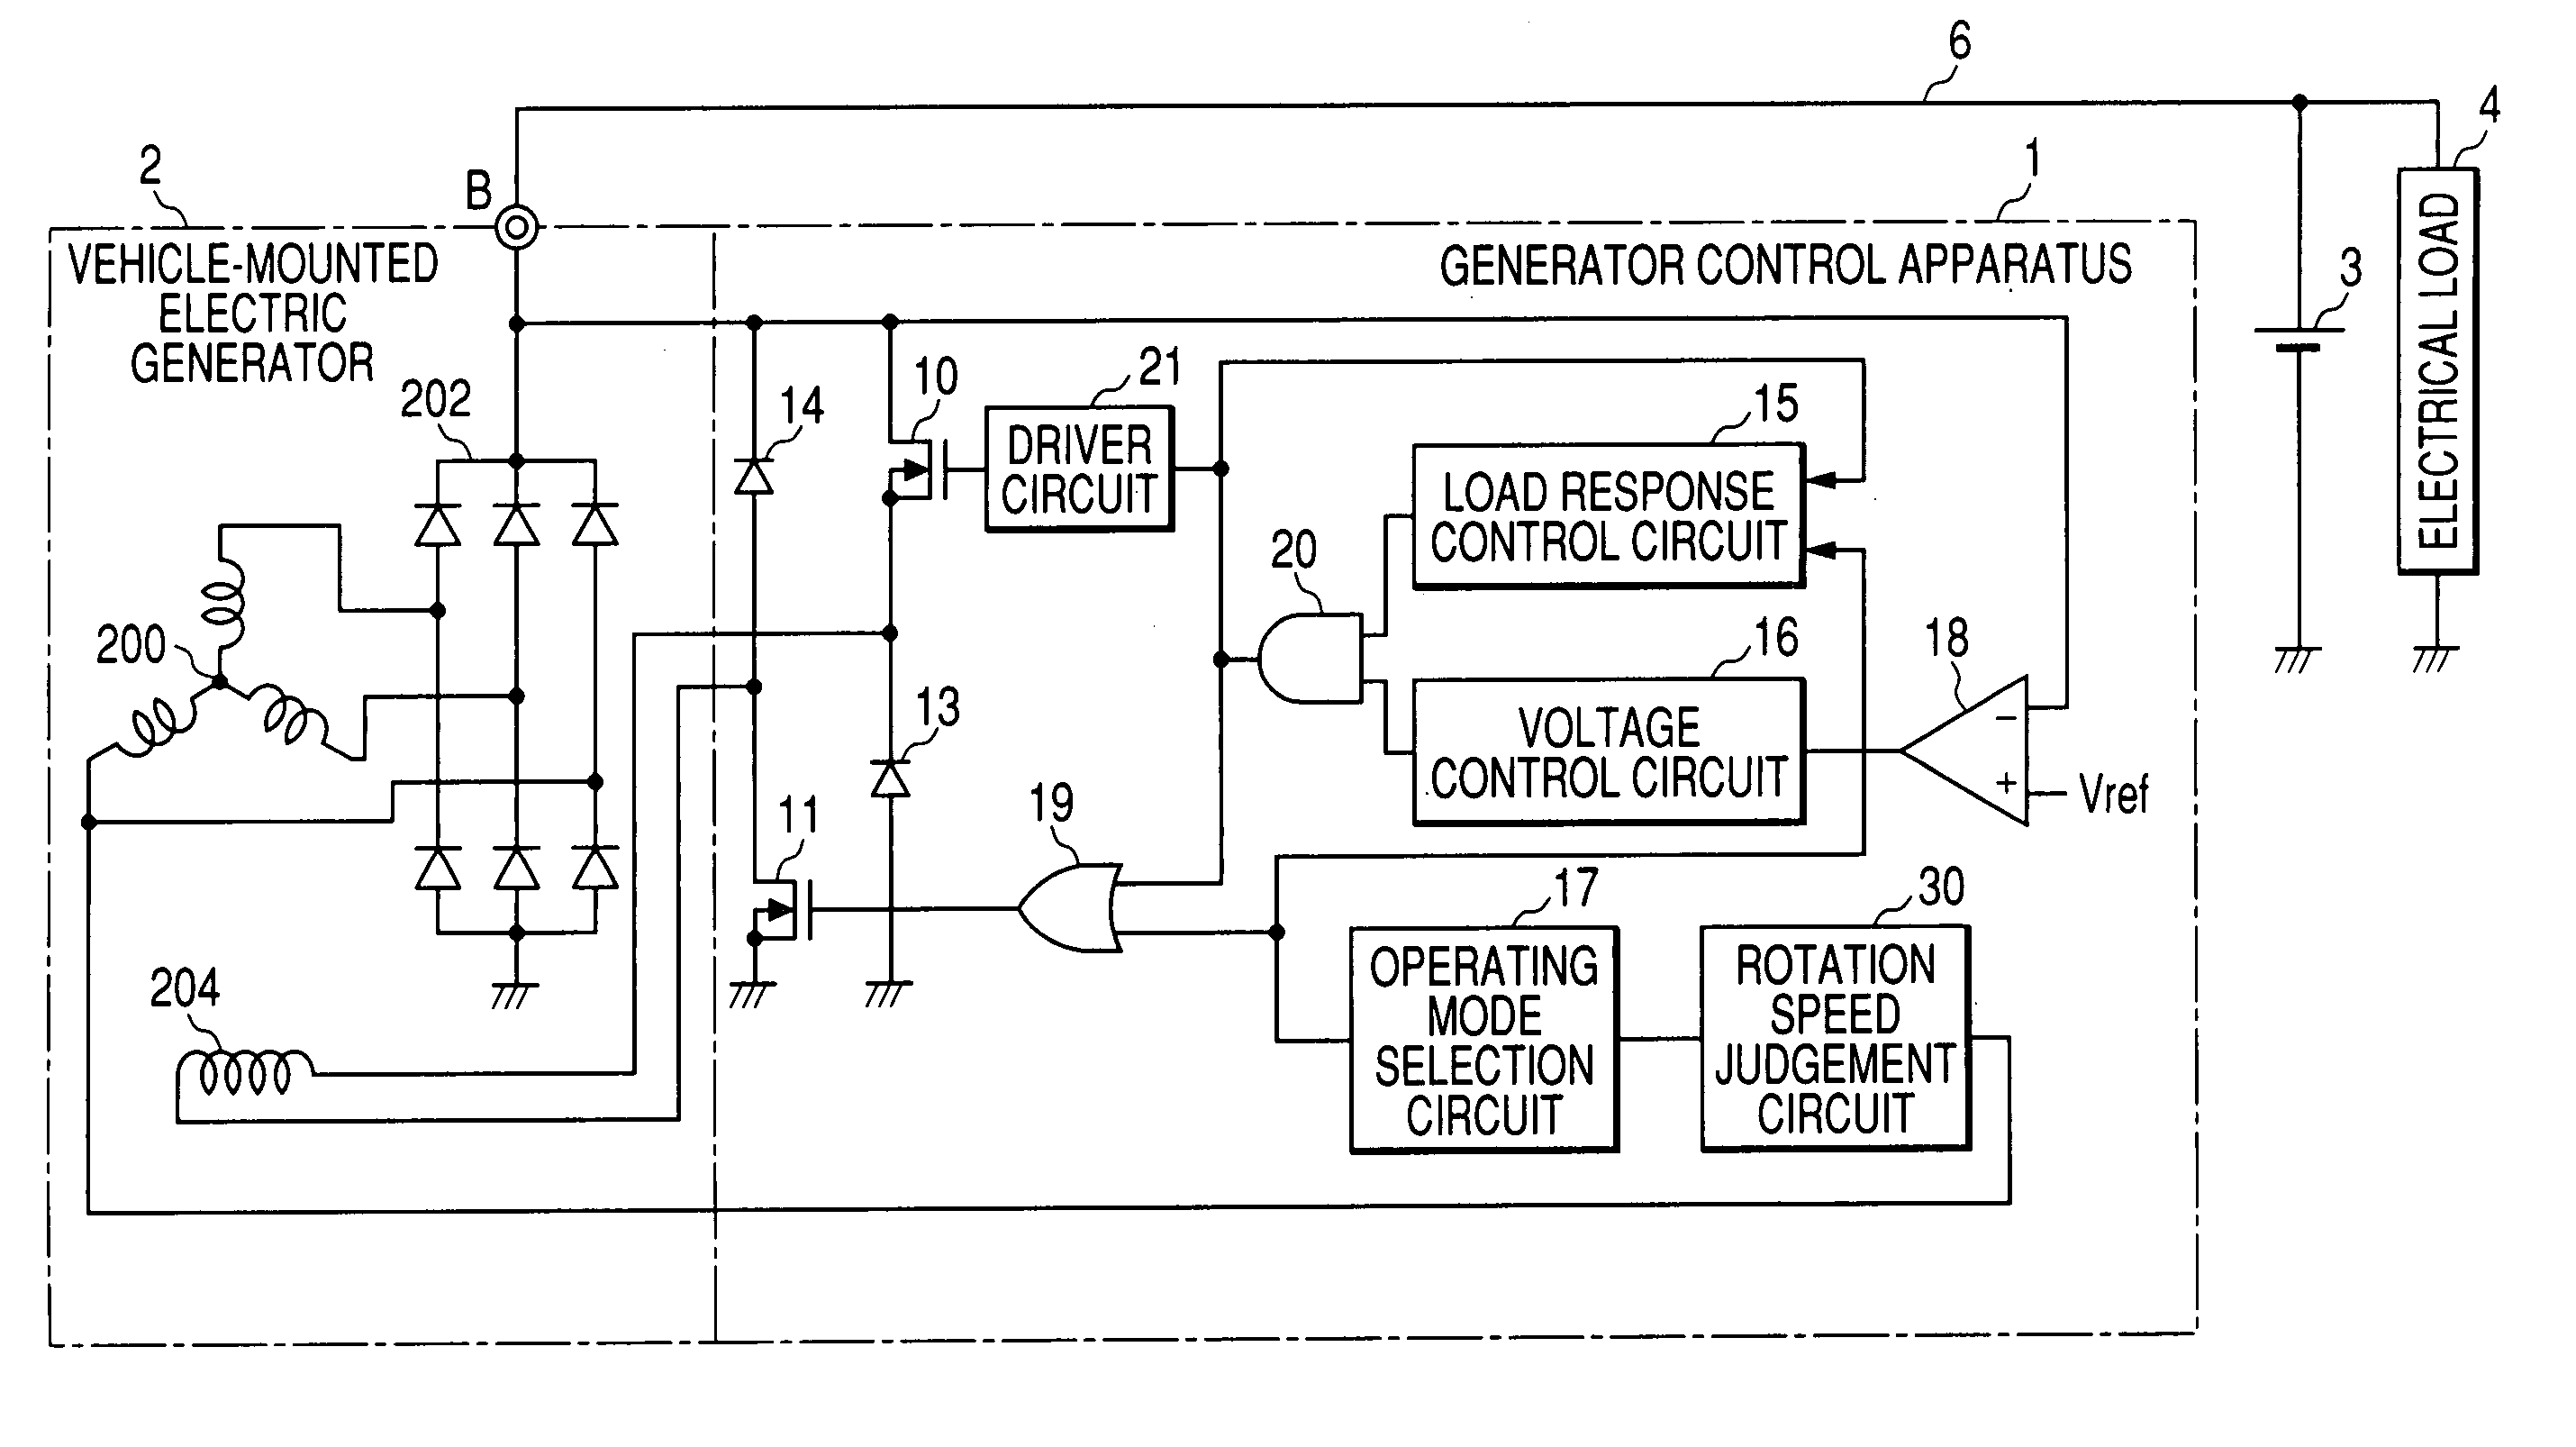 Vehicle-mounted electric generator control system which selectively supplies regenerative field current to battery in accordance with currently available generating capacity